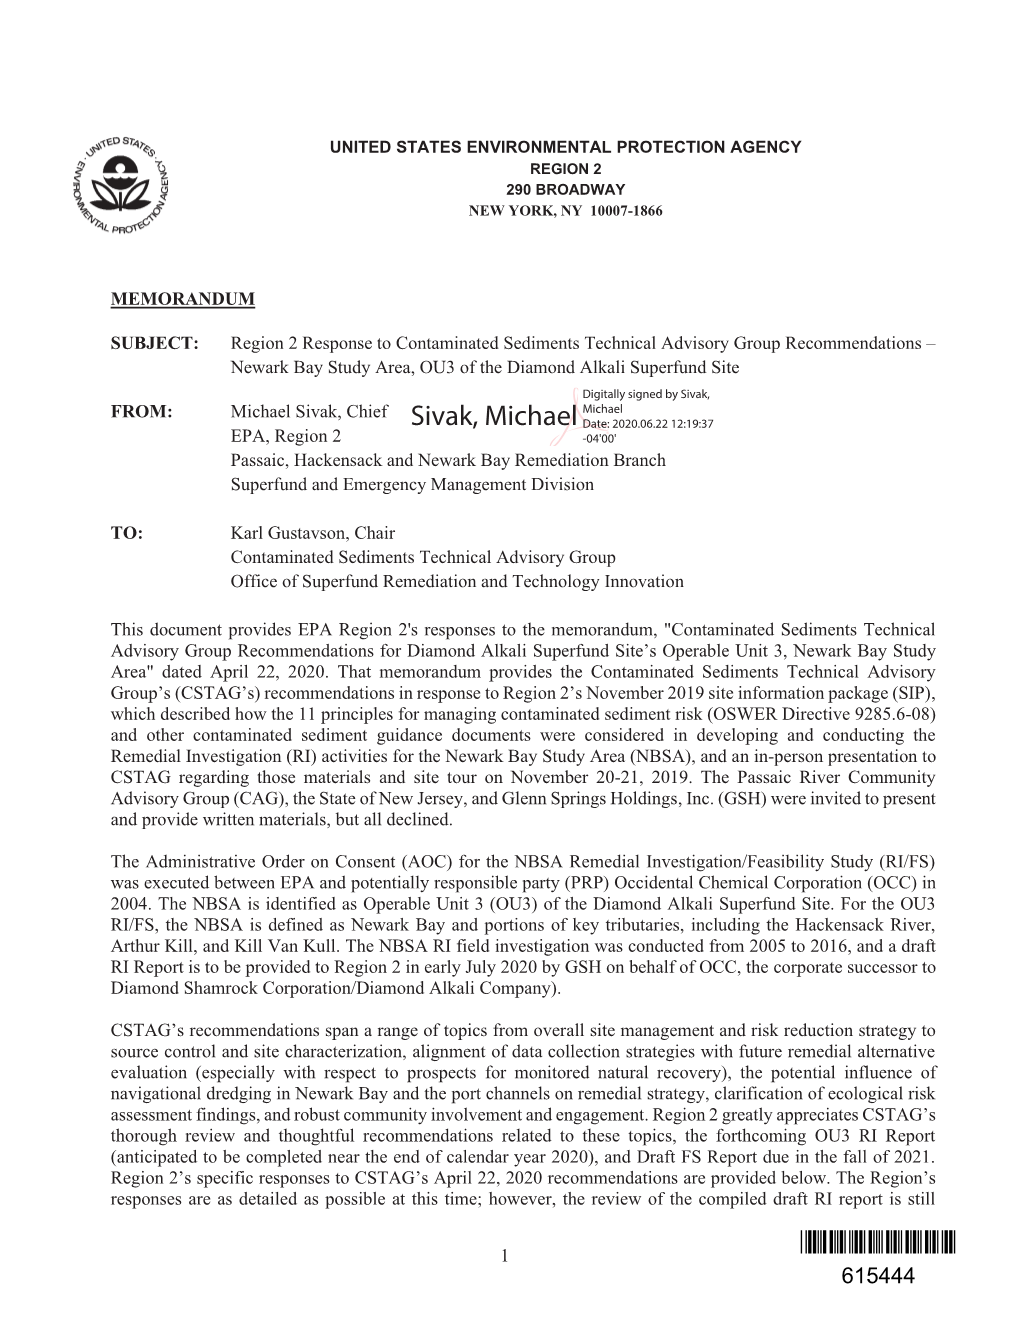 Us Epa Region 2 Response to Cstag Recommendations